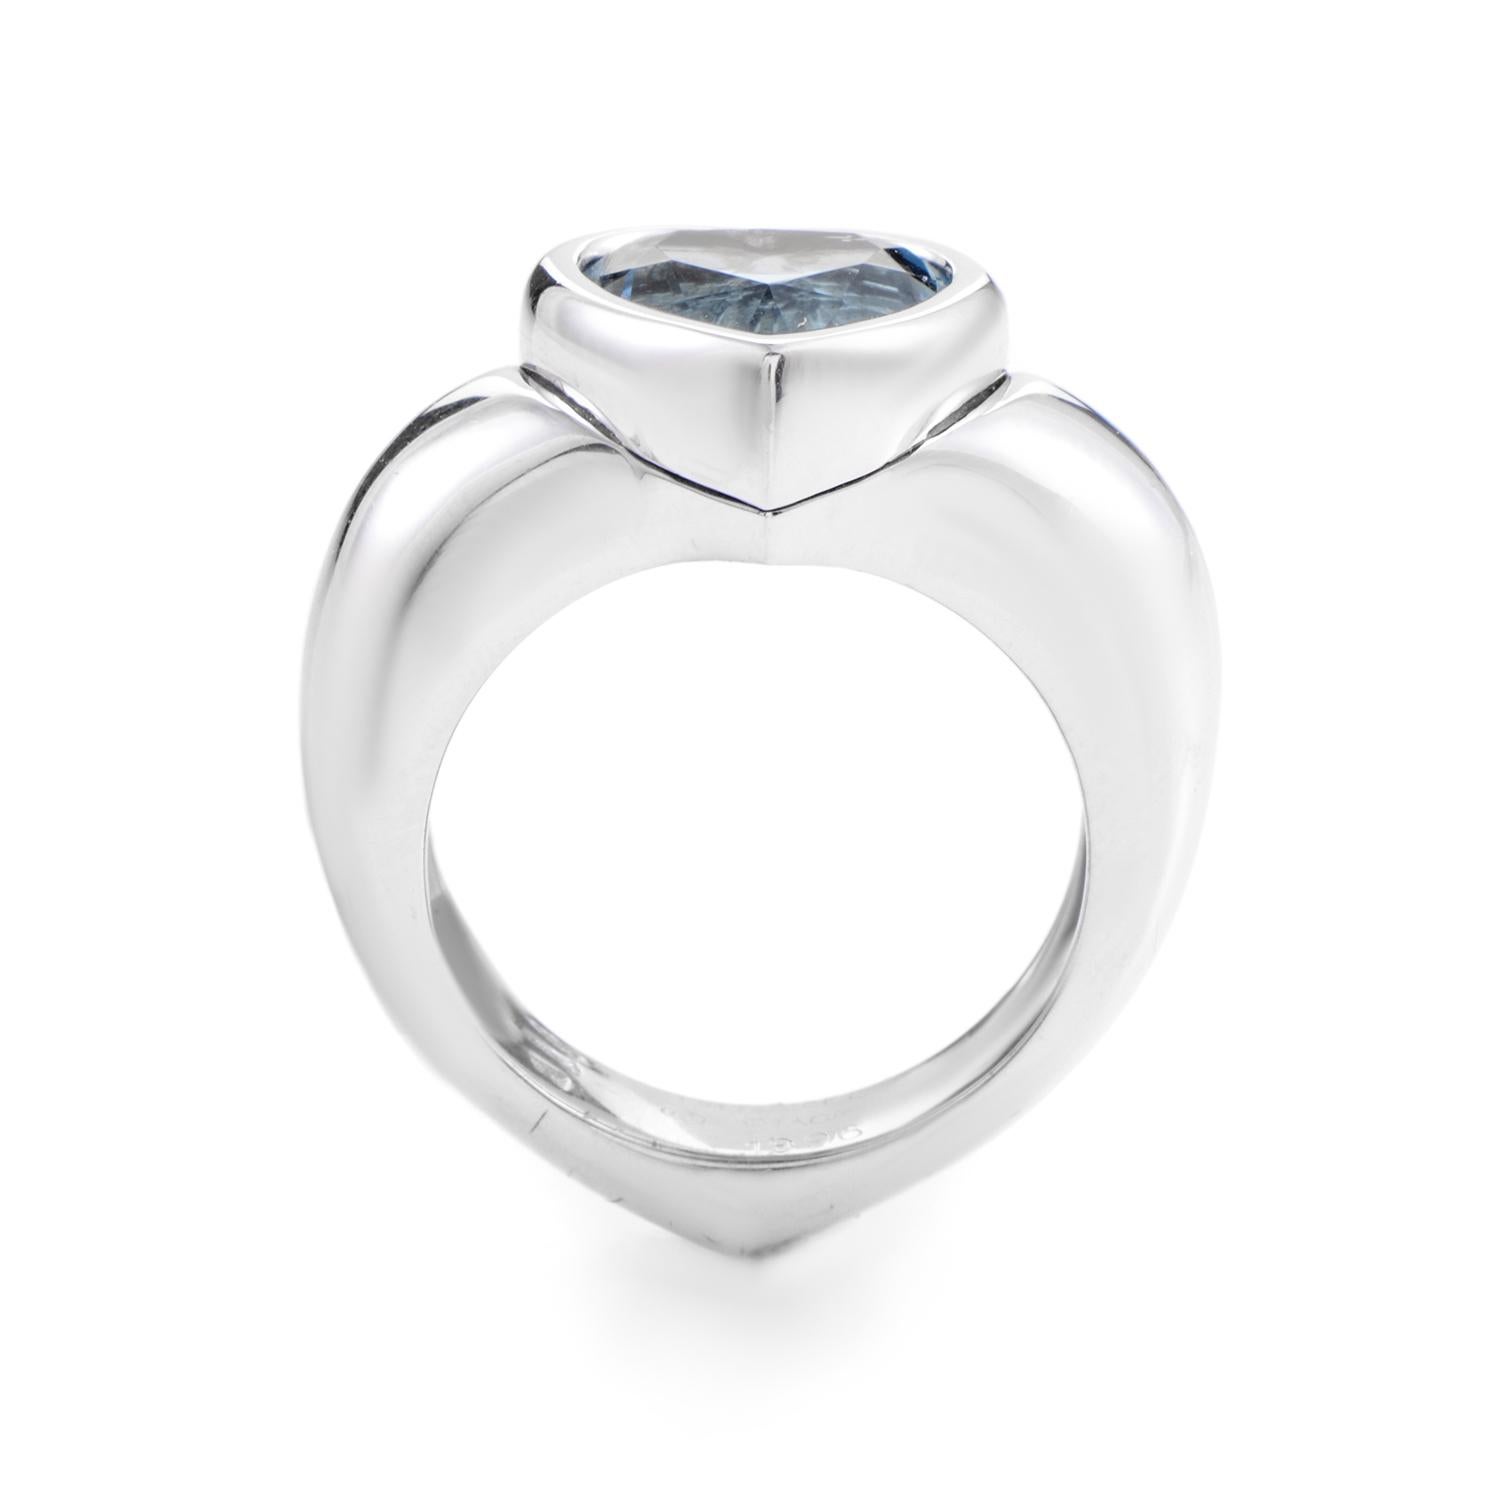 A tantalizing combination of colors makes this gemstone ring from Piaget a real standout! The ring is made of 18K white gold and features a topaz stone set in a heart-shaped bezel.
